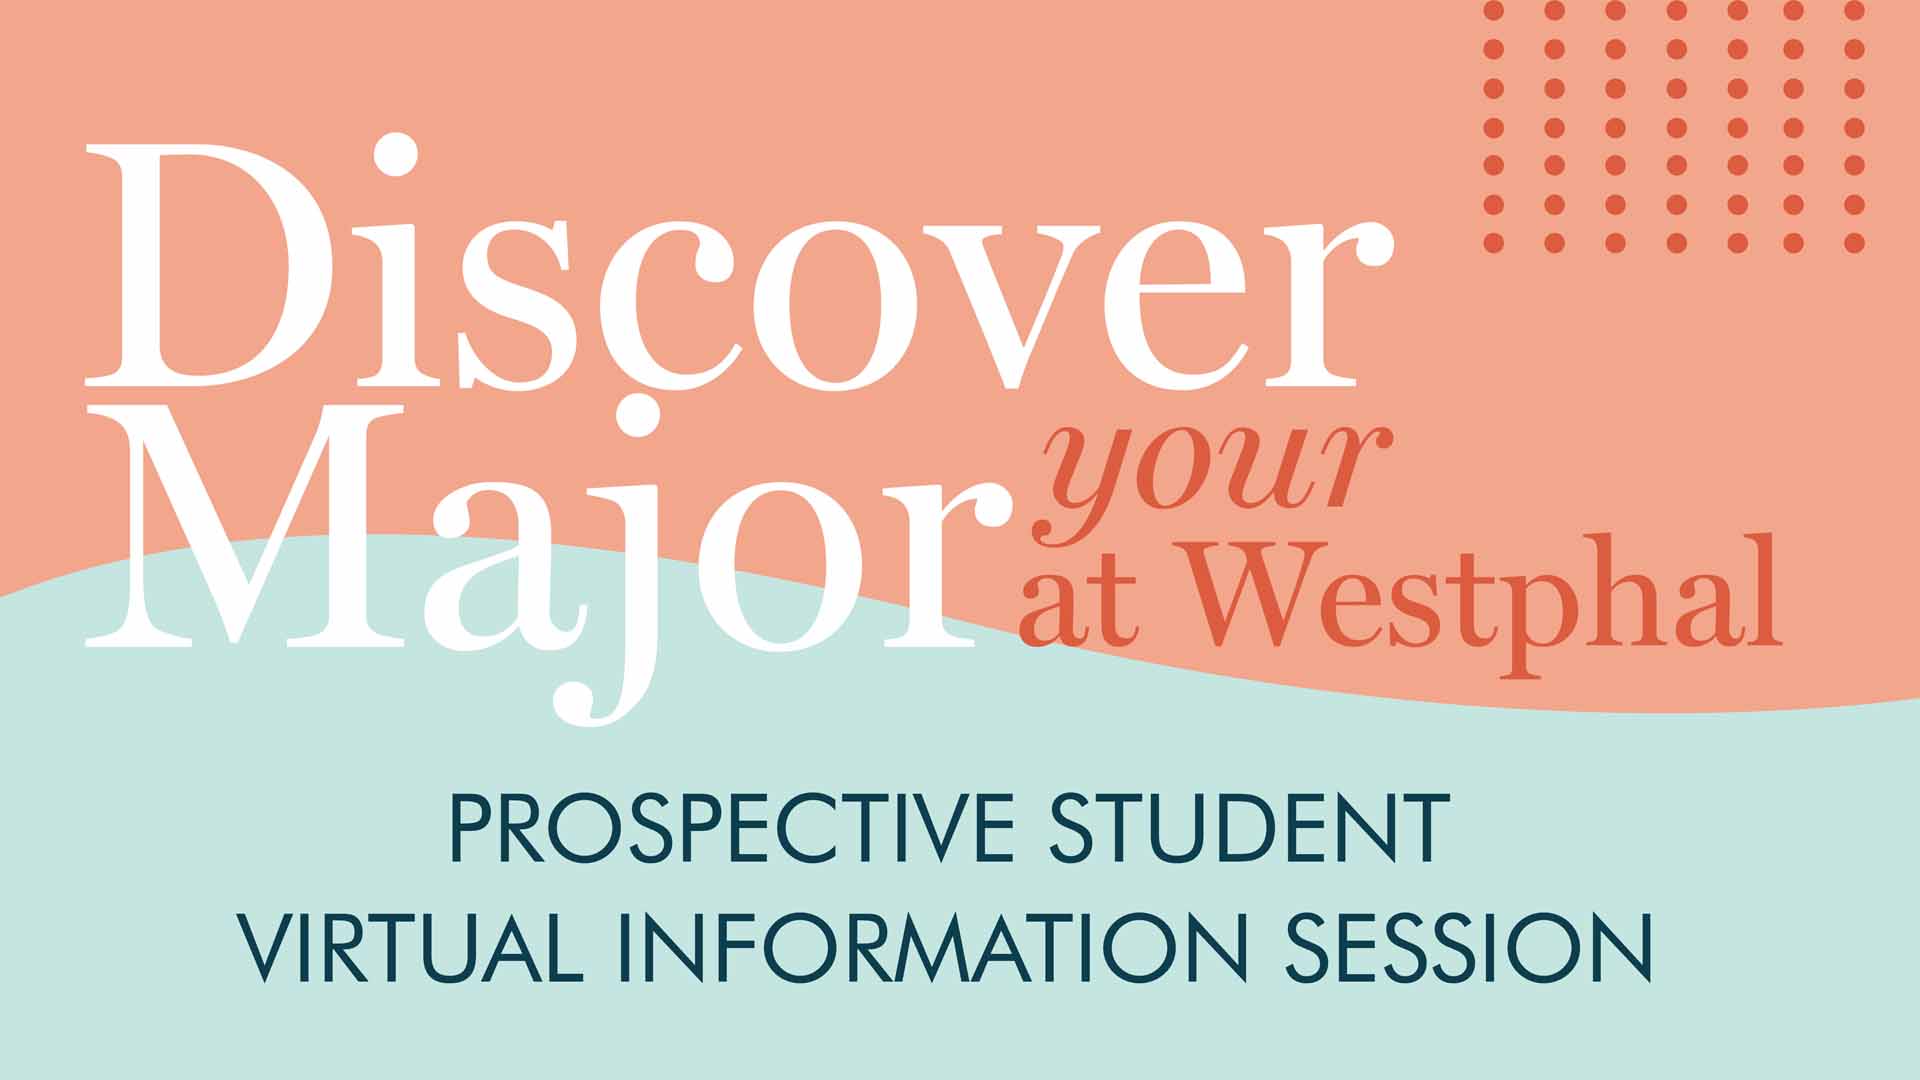 Discover your major at Westphal